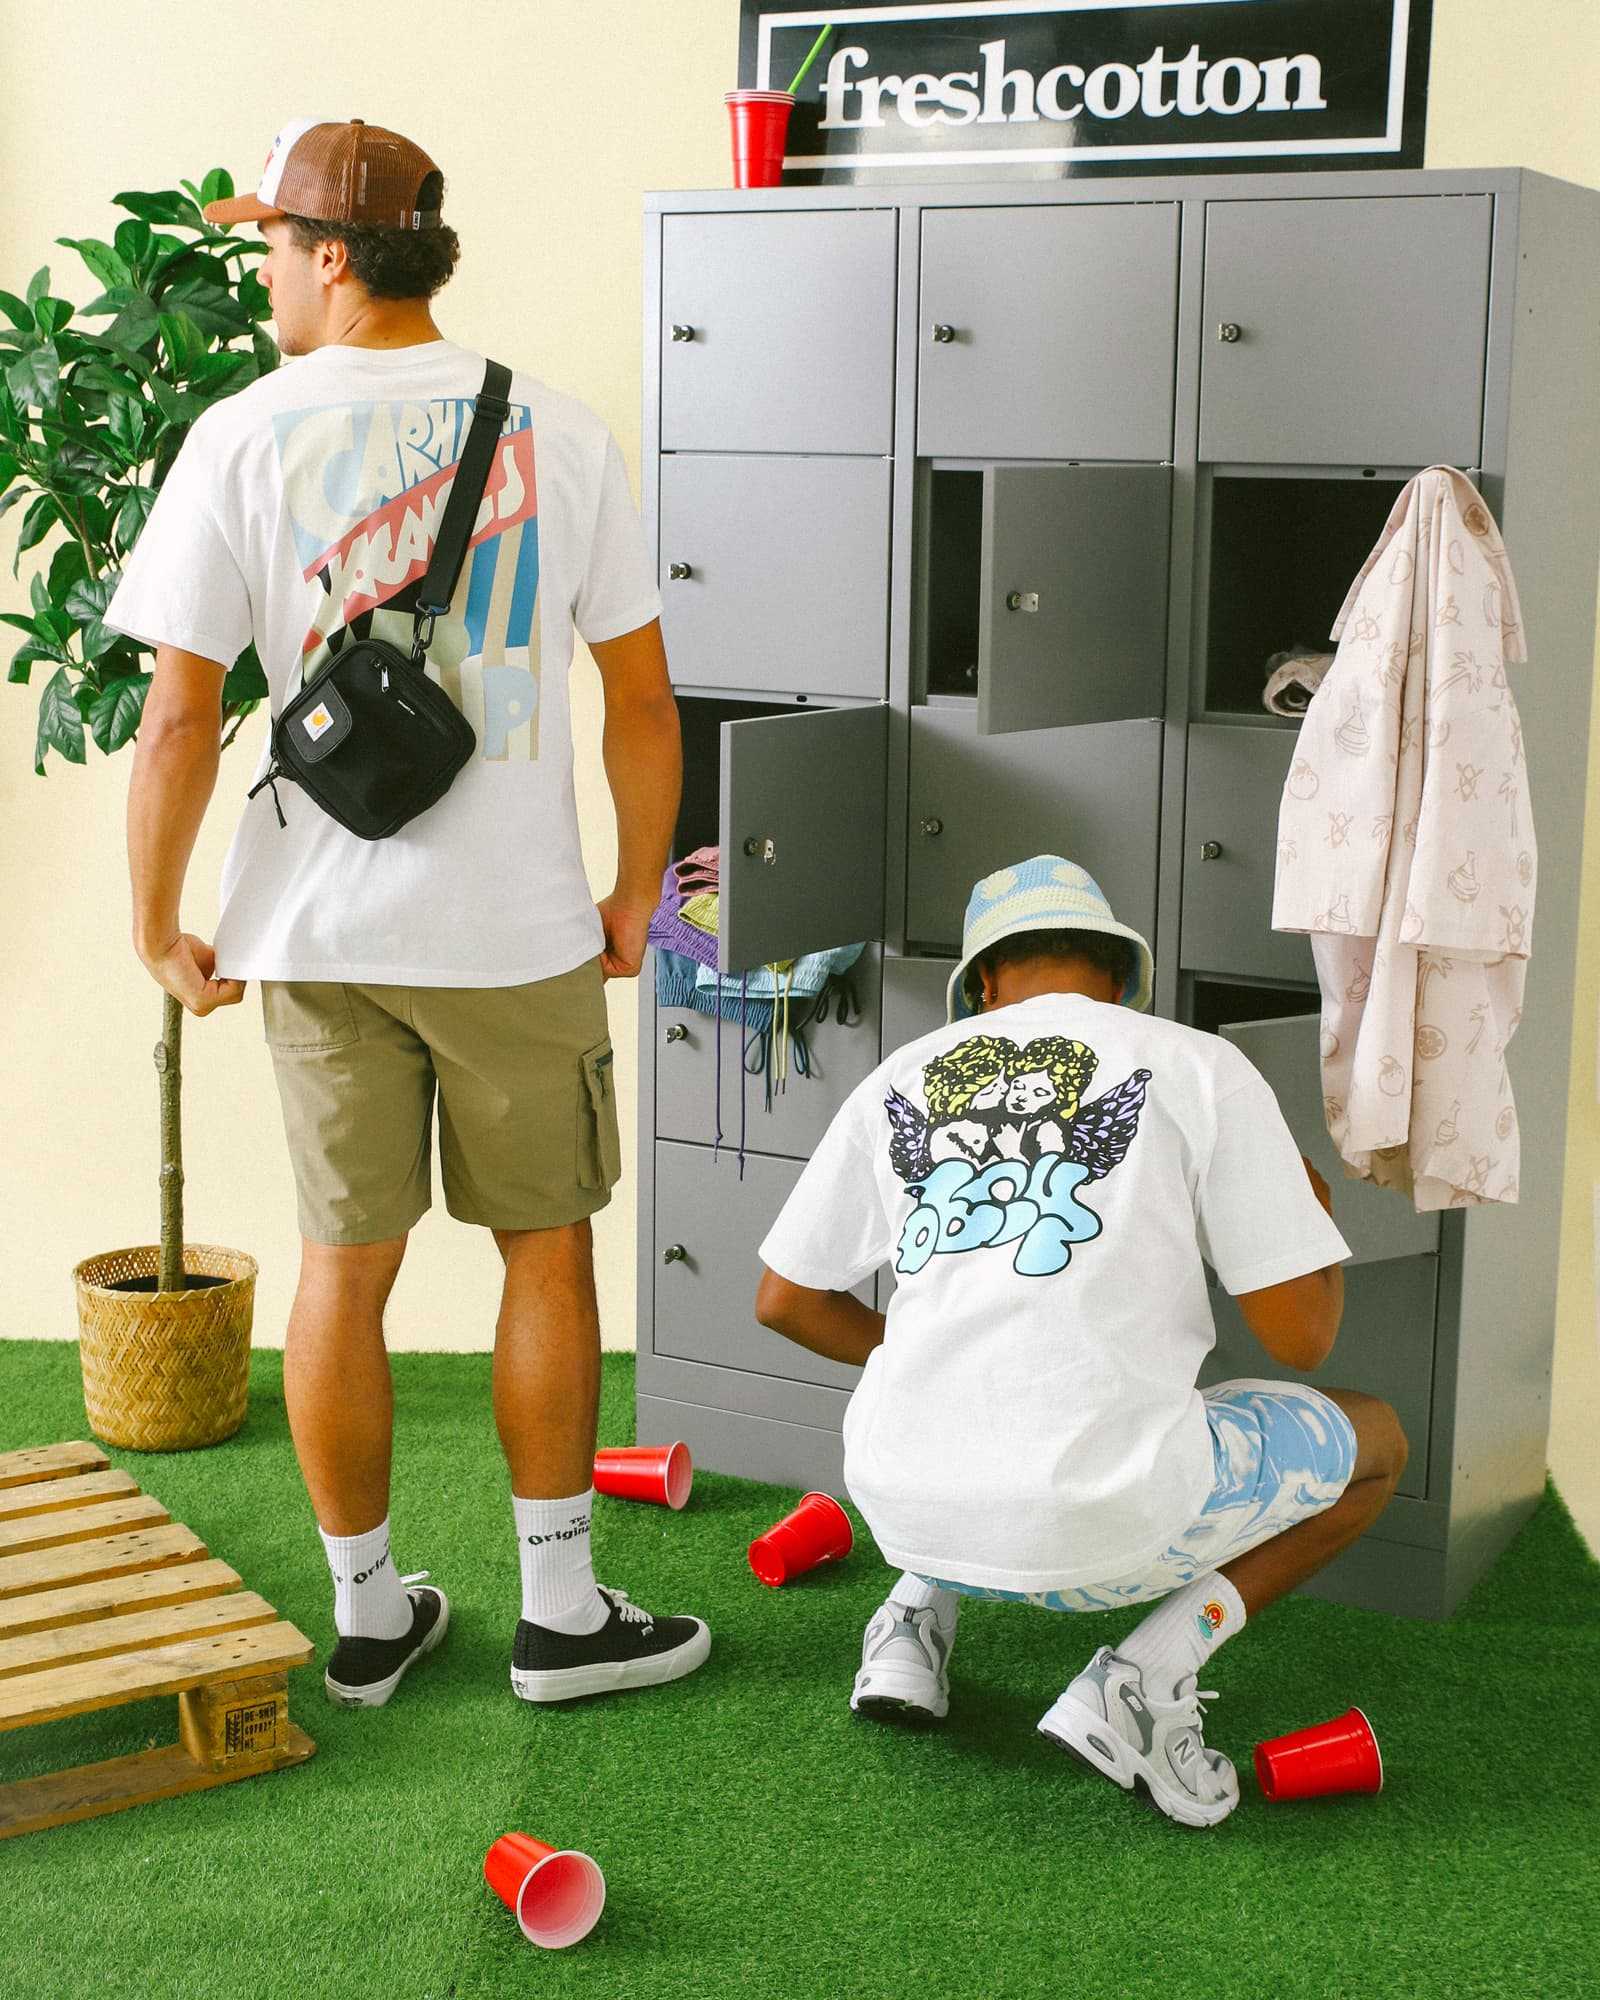 festival outfits with backprints at lockers